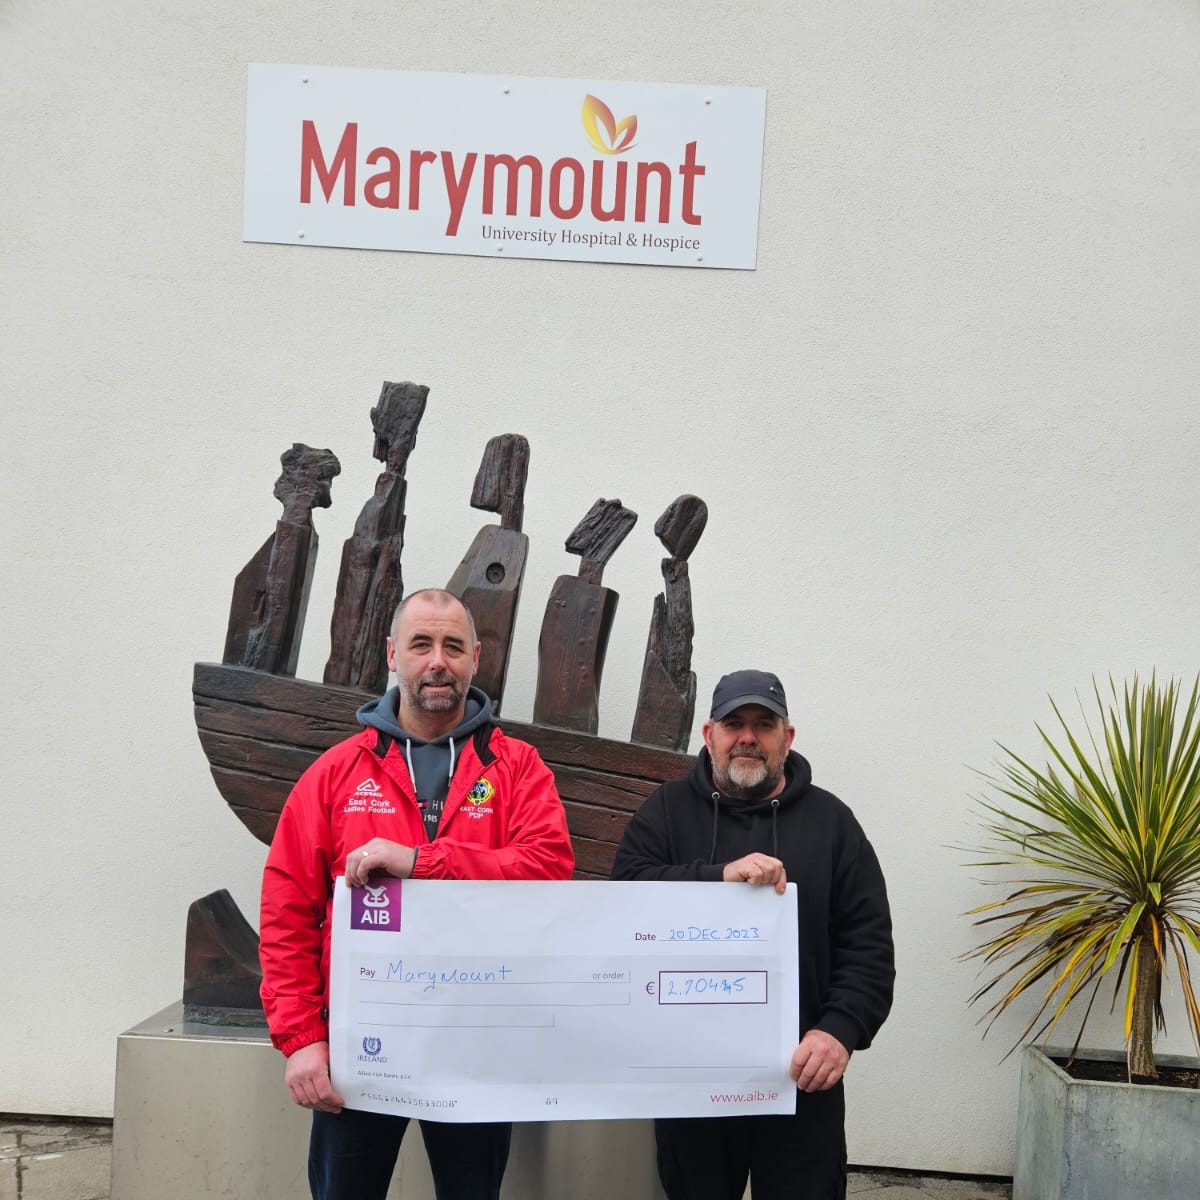 John Mackessy @eastcorklgf and Declan Harte @westcorkladies at @marymountcork donating the proceeds of the inter divisional charity game held @CloughduvHurlin in November. Well done to everyone involved !! @CorkLGFA